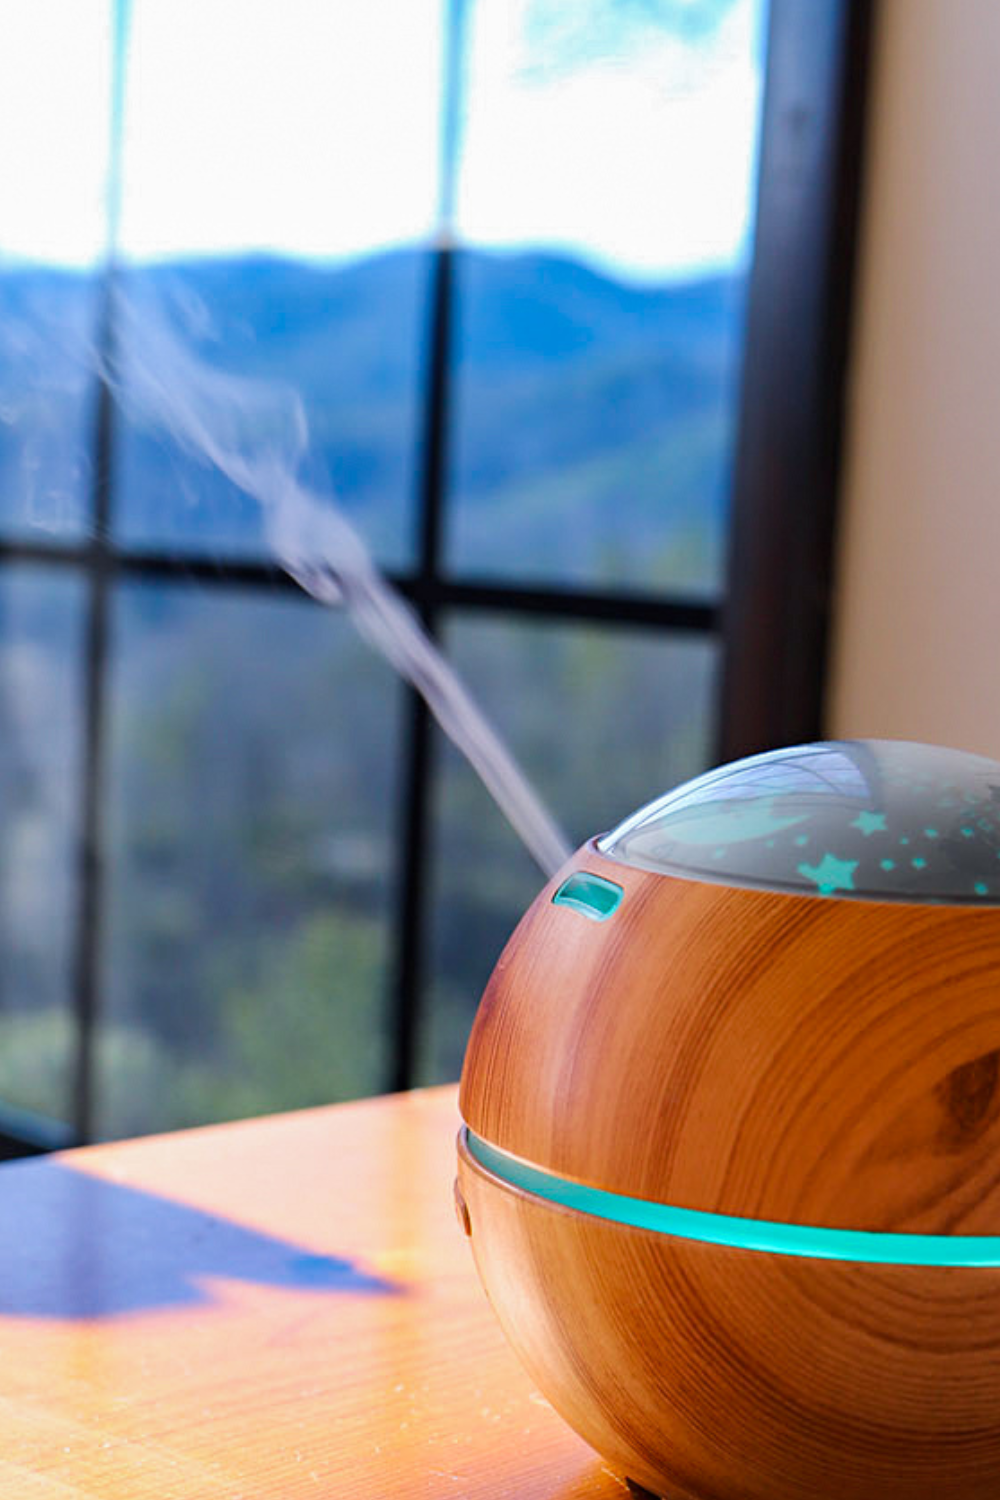 Woodsy Essential Oil Blends to Make the Weekend at the Cabin All the More Calming